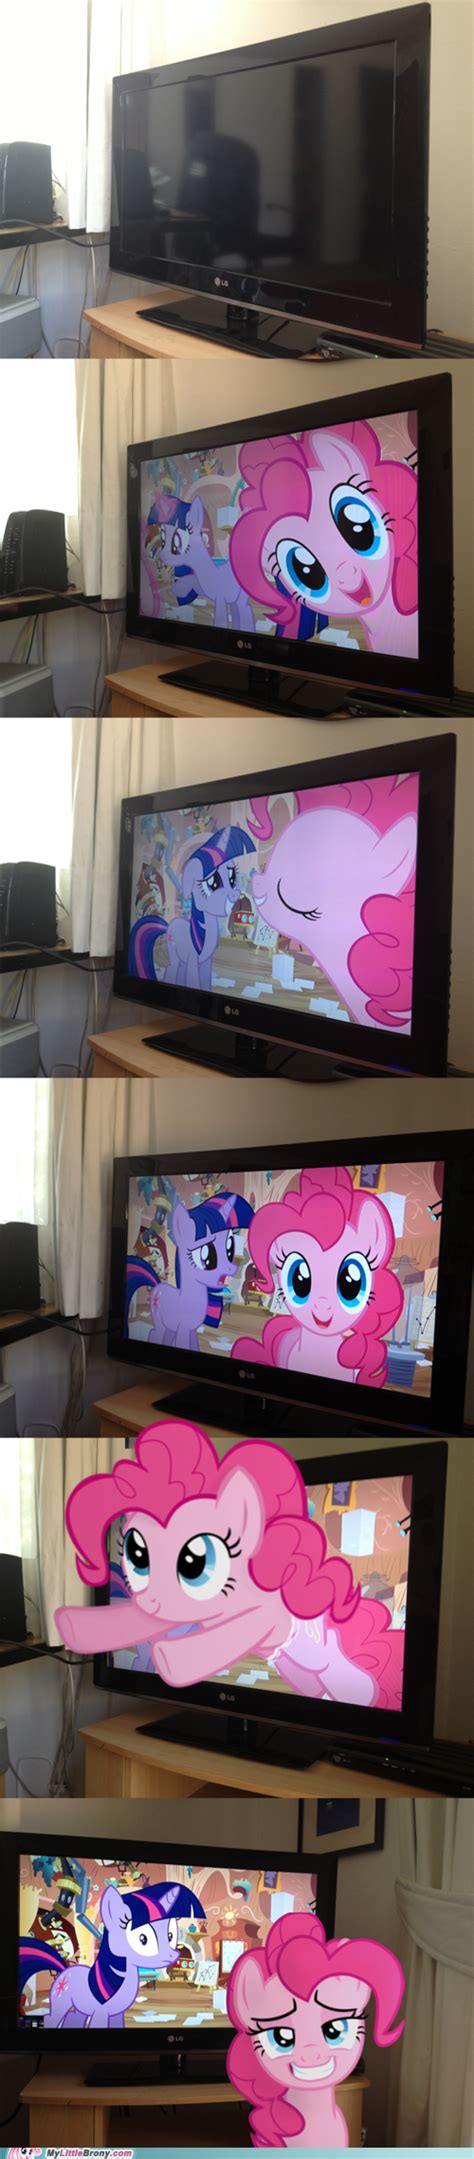 Pinkie Teaches Twilight About The Th Wall My Babe Pony Comic My Babe Pony Pictures